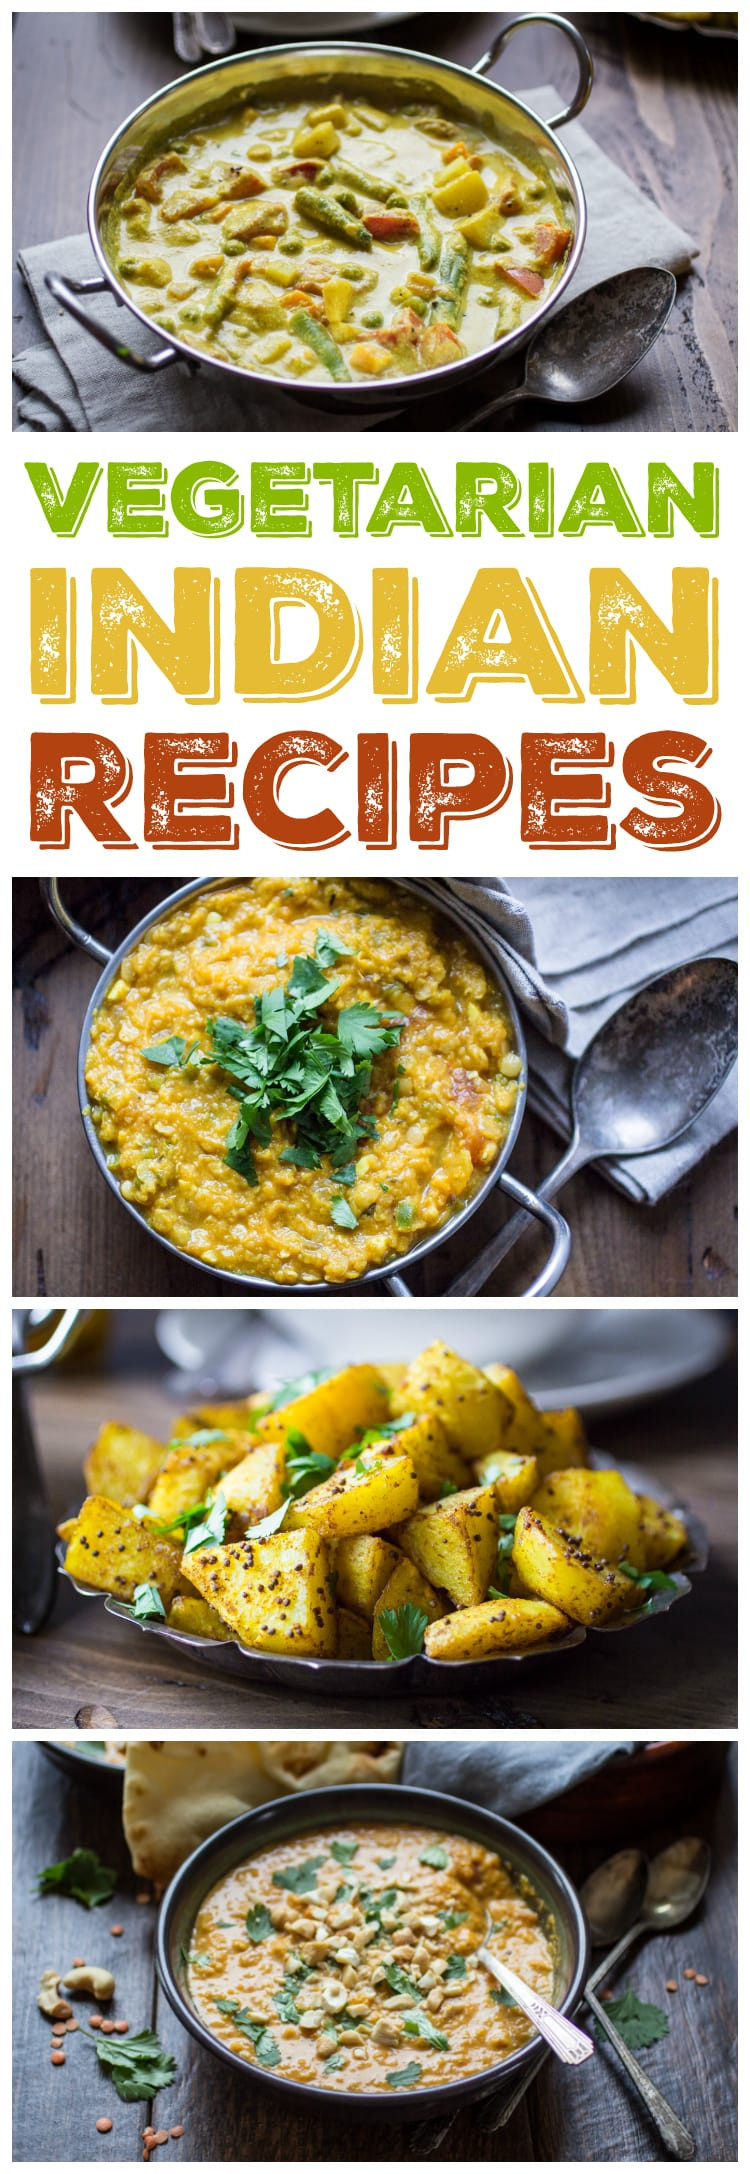 Indian Cuisine Recipes
 10 Ve arian Indian Recipes to Make Again and Again The